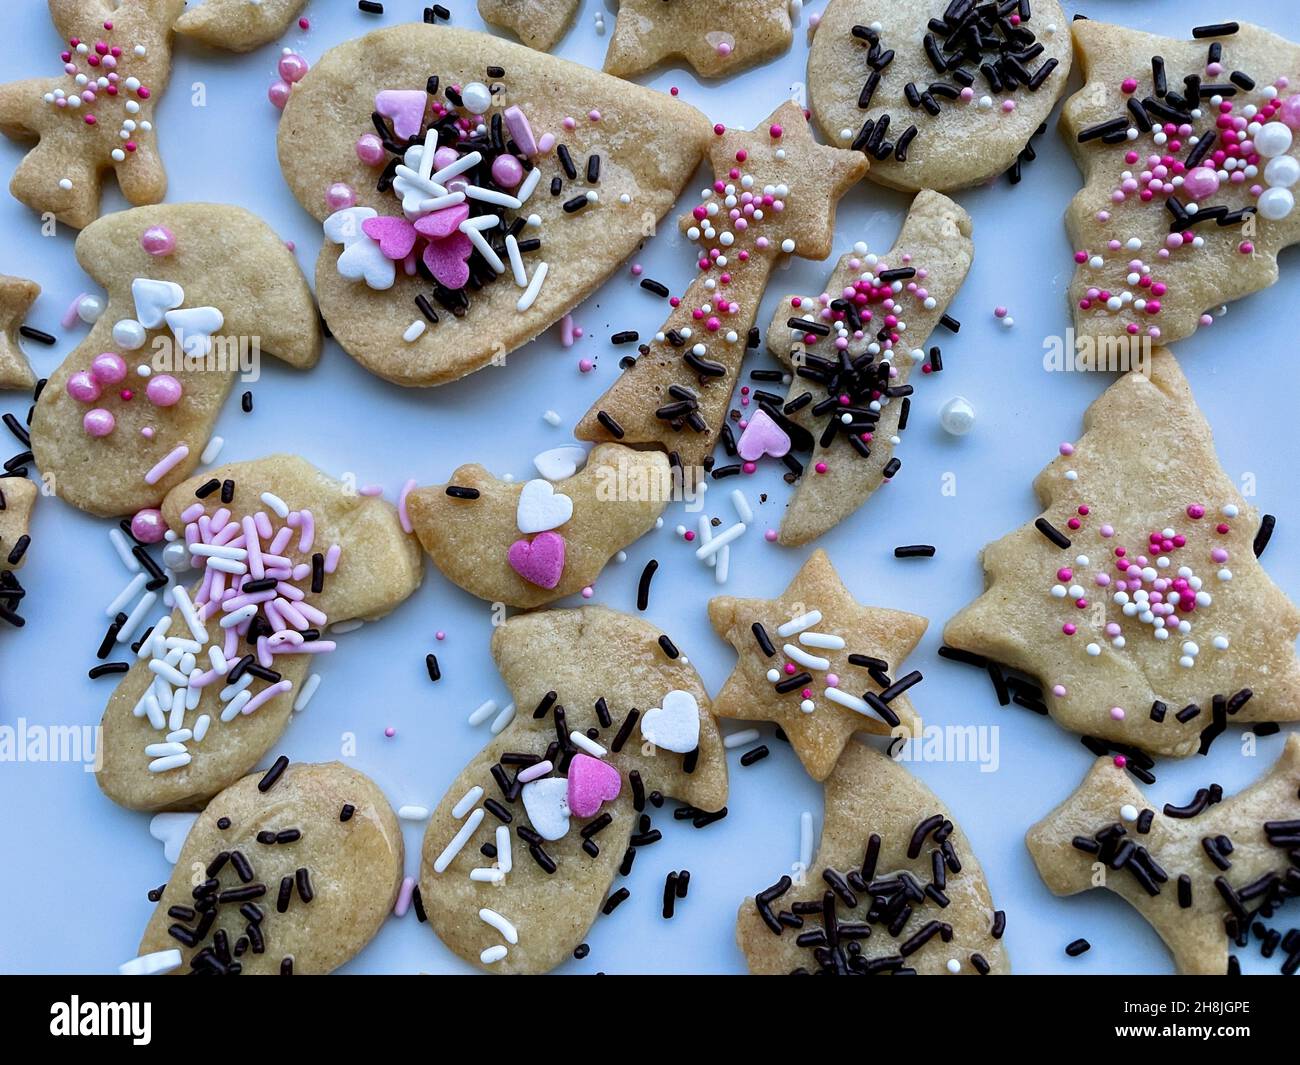 Colorful traditional Christmas cookies made by children. Christmas family baking concept. Aerial view. Stock Photo